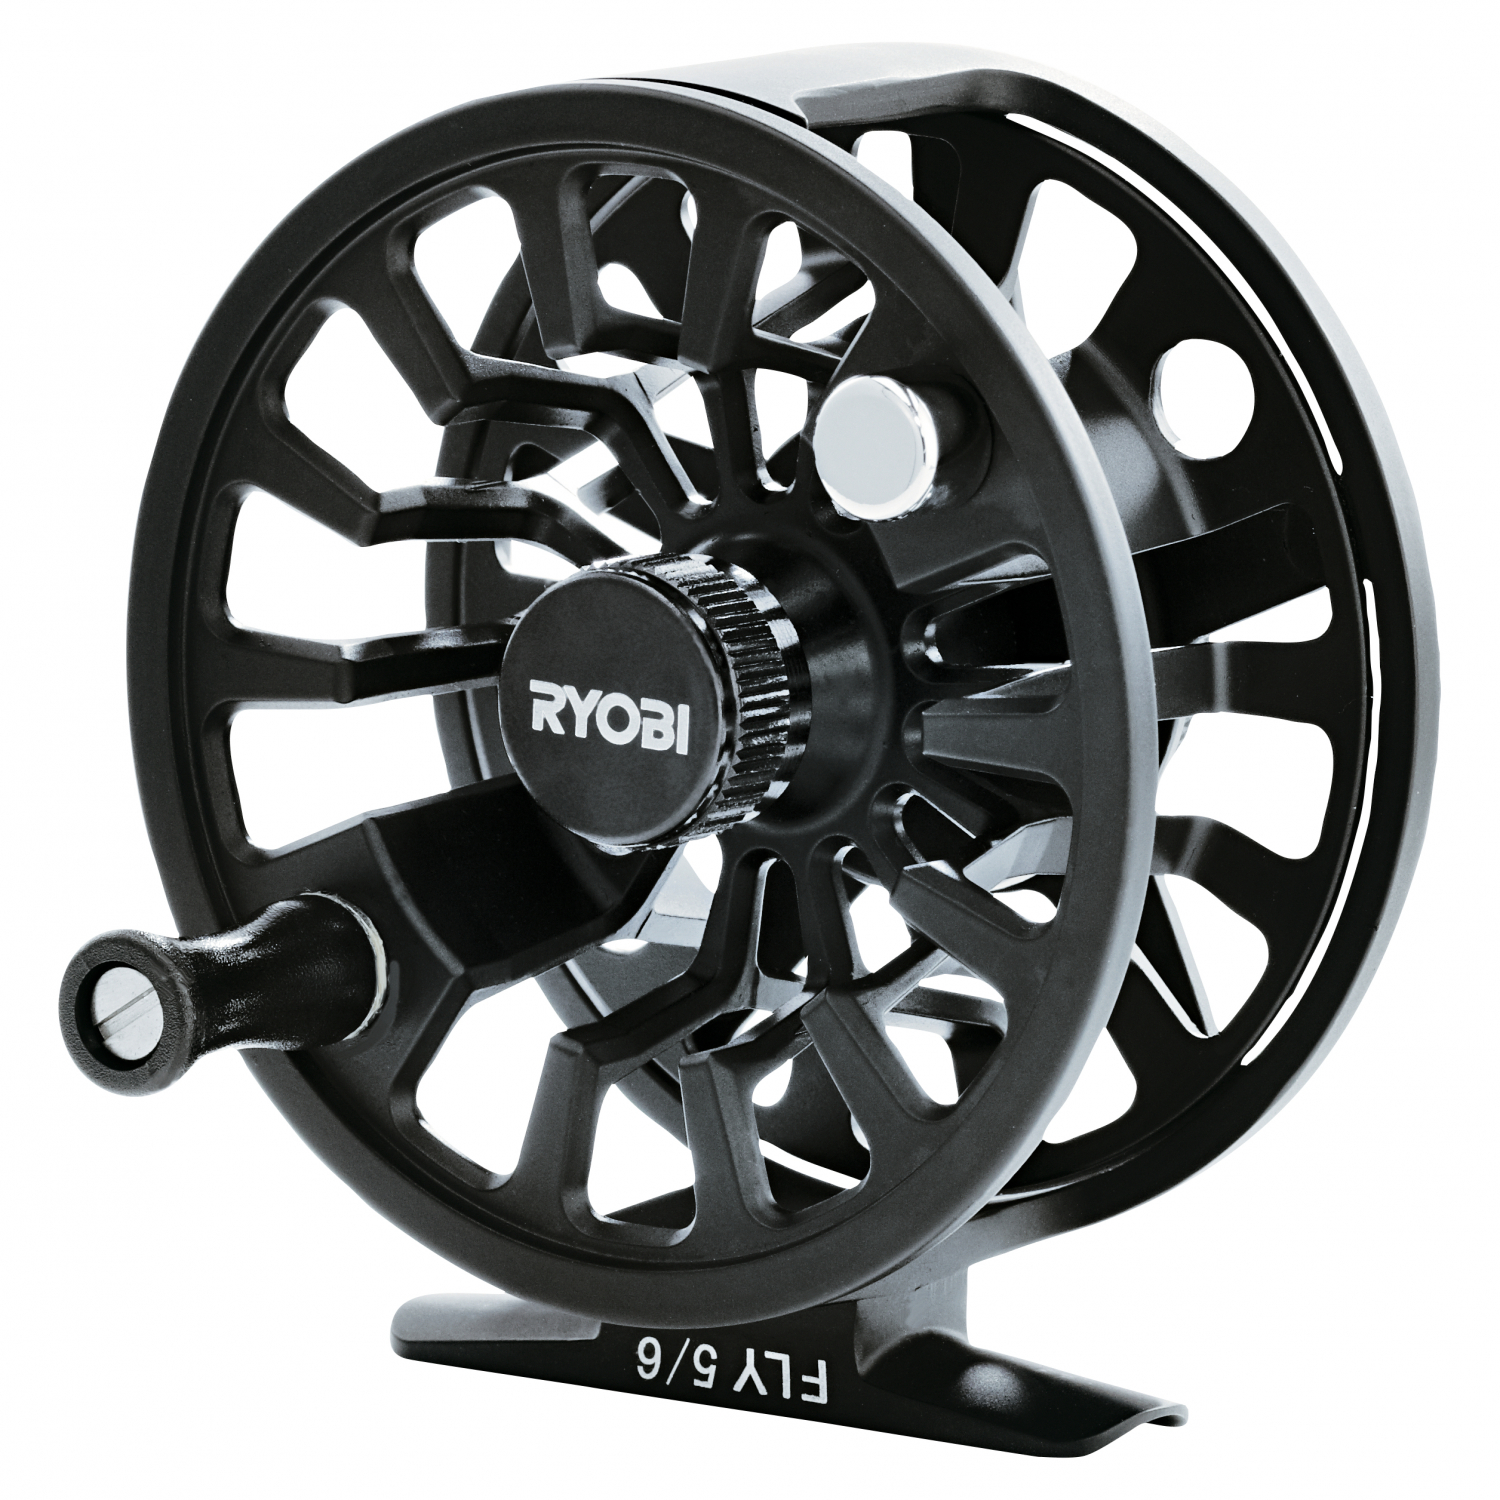 Ryobi Fly reels magic fly at low prices